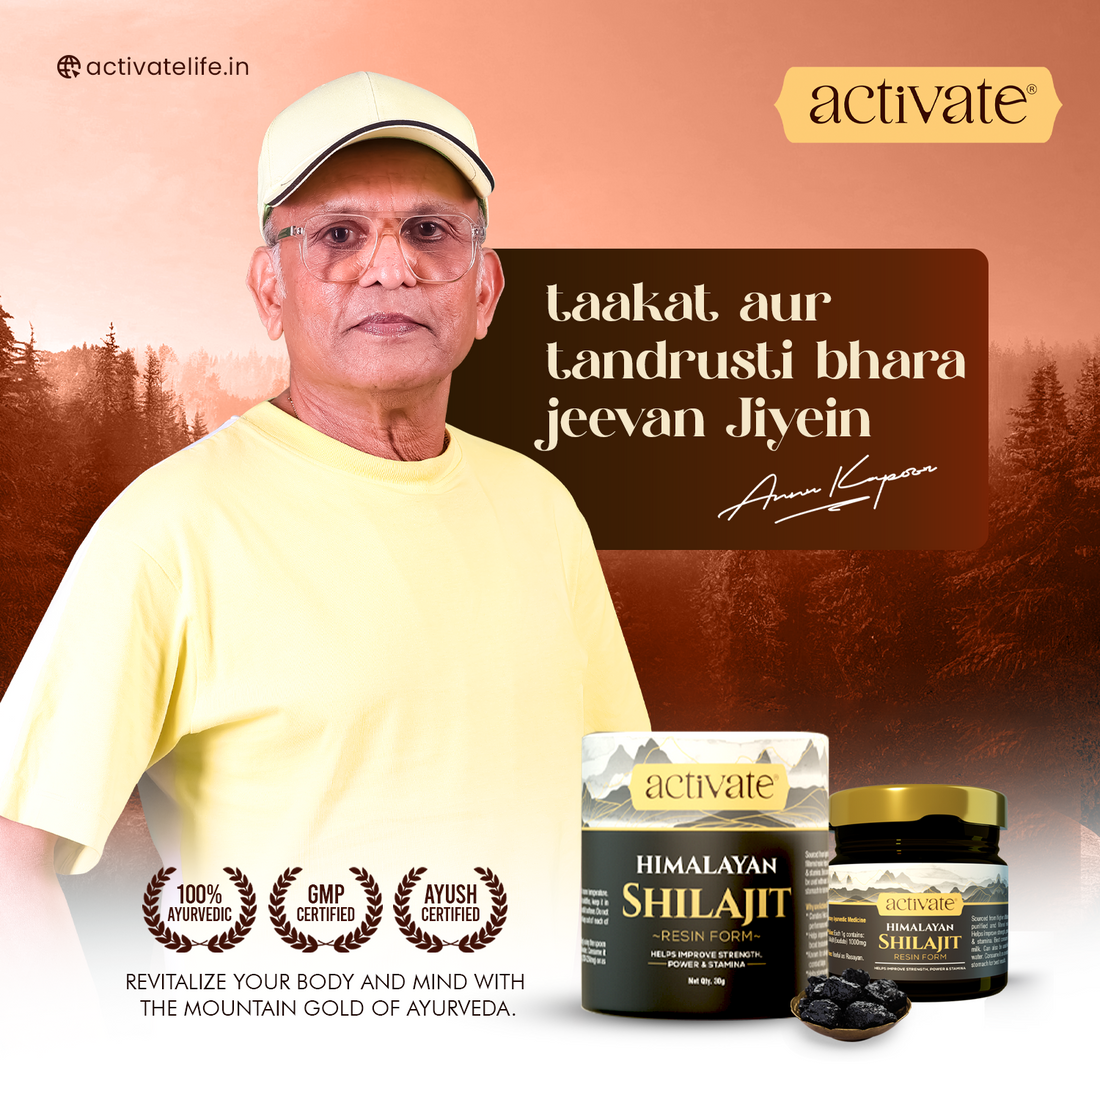 Activate Himalayan Shilajit Resin 20g – For Endurance, Stamina and Strength – Lab Tested